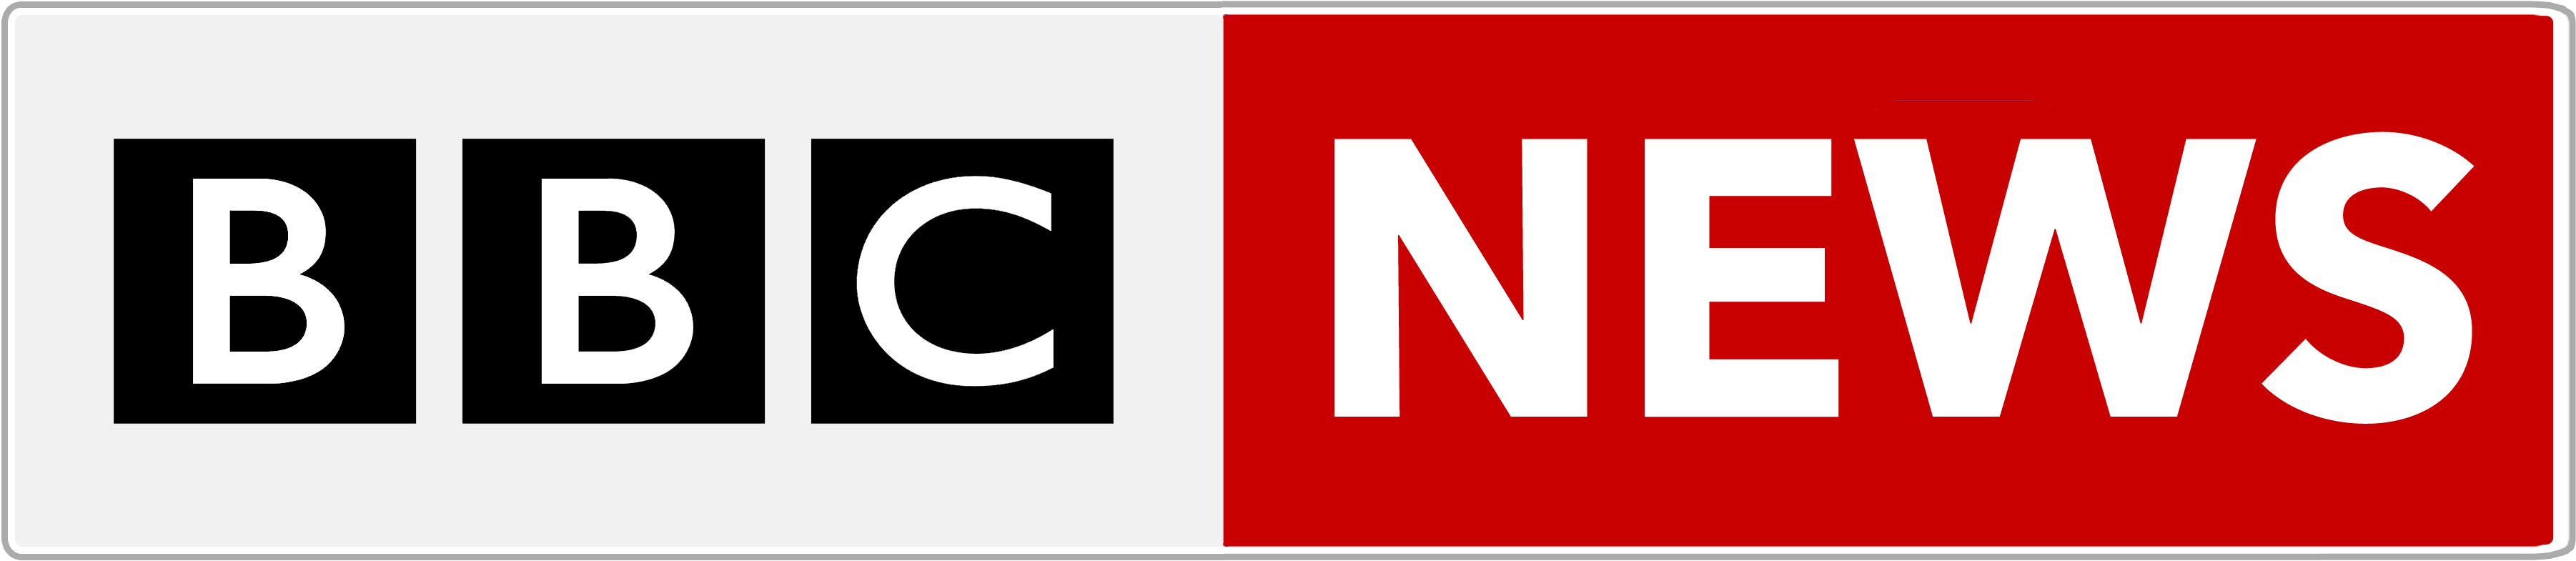 Image Result For Bbc News Logo - Bbc News Logo Png Clipart (3701x864), Png Download